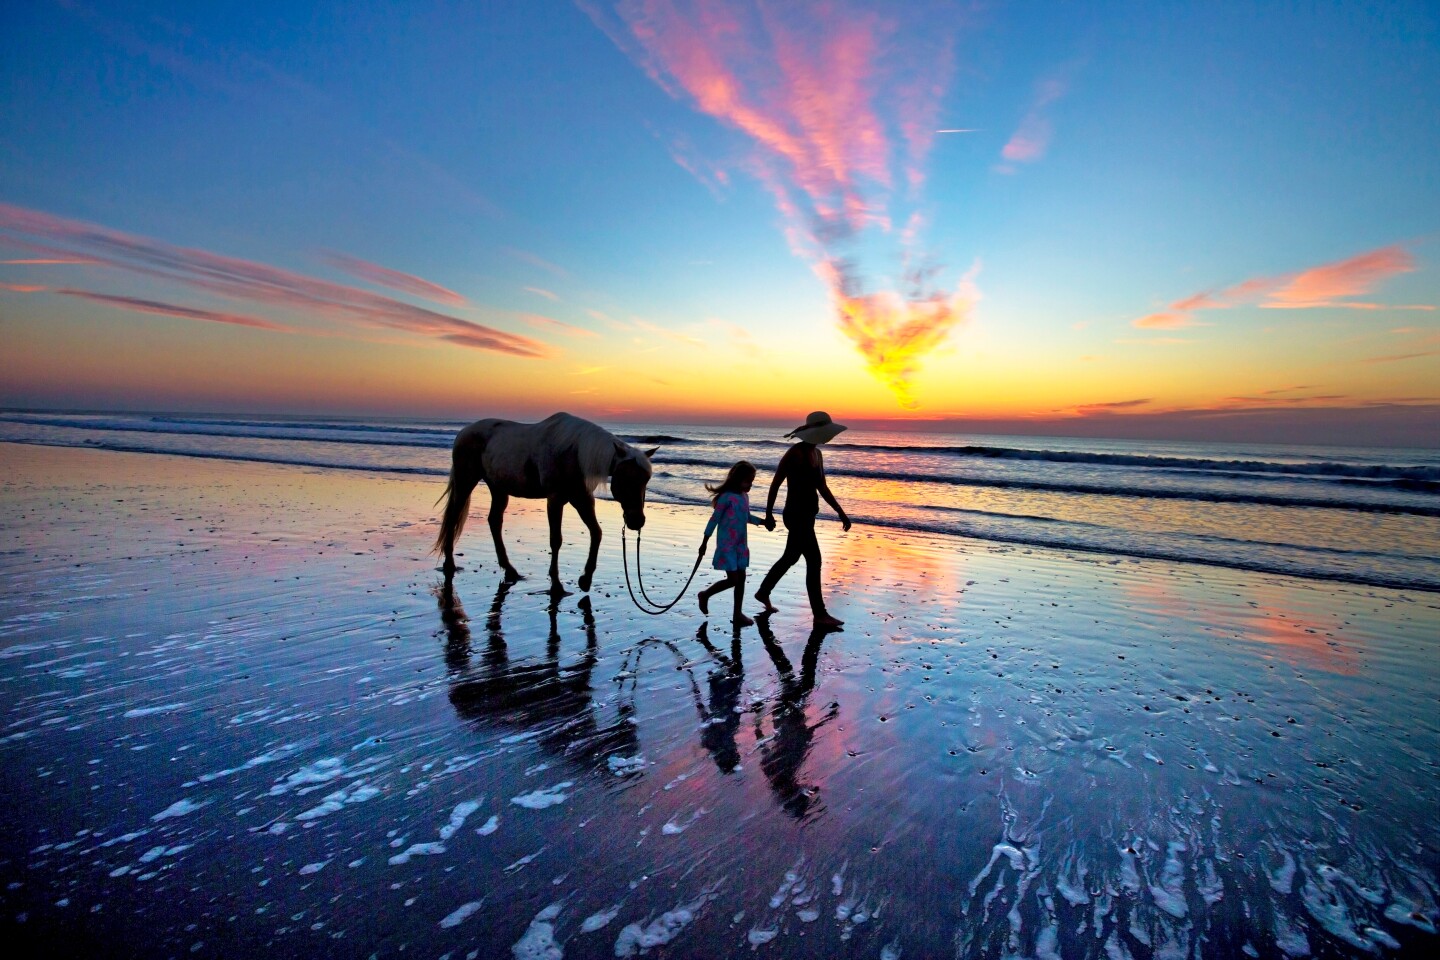 <h2>11. Amelia Island</h2> <ul>   <li><b>Location:</b> Barrier island on Northern Atlantic coast</li>   <li><b>Come for: </b>uncrowded beaches and horseback riding on the sand</li>  </ul> <p>With 13 miles of unspoiled beaches and Spanish-moss-draped oak trees, this barrier island feels more like a lost-in-time Southern retreat than its palm-lined brethren further south. The quartz-filled sand beaches are framed by 40-feet-tall sand dunes—<a class="Link" href="https://ameliaislandhorsebackriding.com/" rel="noopener">horseback riding along the dunes</a> offers another vantage point of the natural paradise.</p> <p>Beyond the beaches and coastal recreation, Amelia Island is also home to the oldest lighthouse in Florida (first lit by whale oil in 1838) and Florida’s oldest bar, <a class="Link" href="https://www.facebook.com/PalaceSaloon1903/" rel="noopener">the Palace Saloon</a>.</p> <p><b>Where to stay</b></p> <ul>   <li><b>Book now: </b><a class="Link" href="https://ameliaschoolhouseinn.com/" rel="noopener">The Amelia Schoolhouse Inn</a></li>  </ul> <p>Located right in downtown Fernandina Beach on Amelia Island, the <a class="Link" href="https://ameliaschoolhouseinn.com/" rel="noopener">Amelia Schoolhouse Inn</a> served as a school from 1886 until the late 20th century. The boutique hotel has kept historical features like original windows and heart pine floors, but coupled with modern amenities like on-site mini golf and an upscale bar, the Principal’s Office.</p>